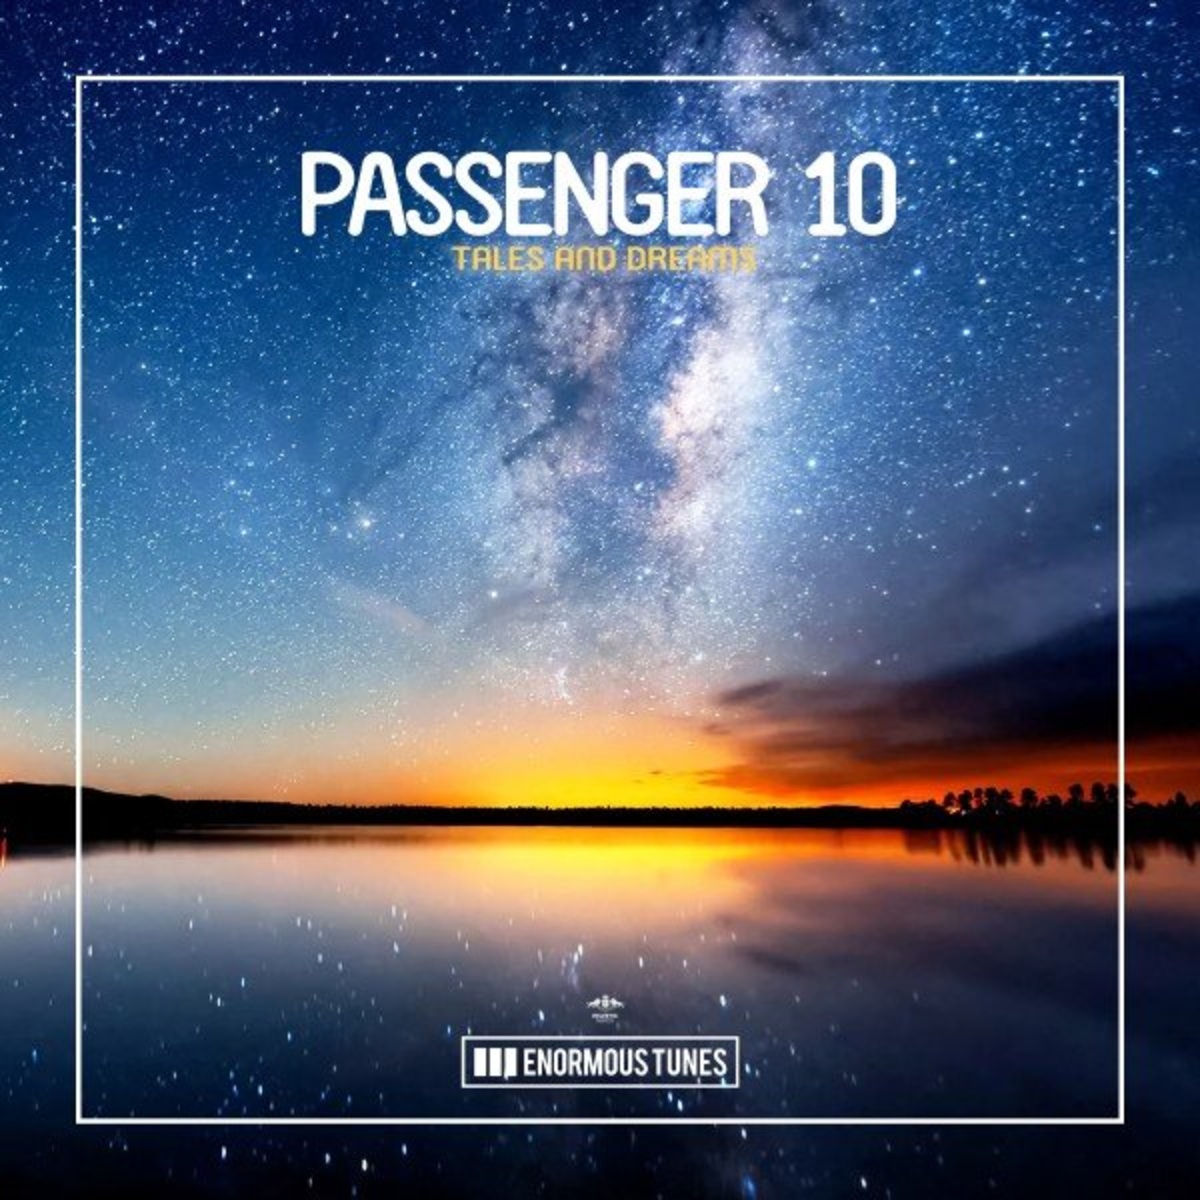 Age of discovery extended mix passenger 10 anker soundcore liberty neo tws true